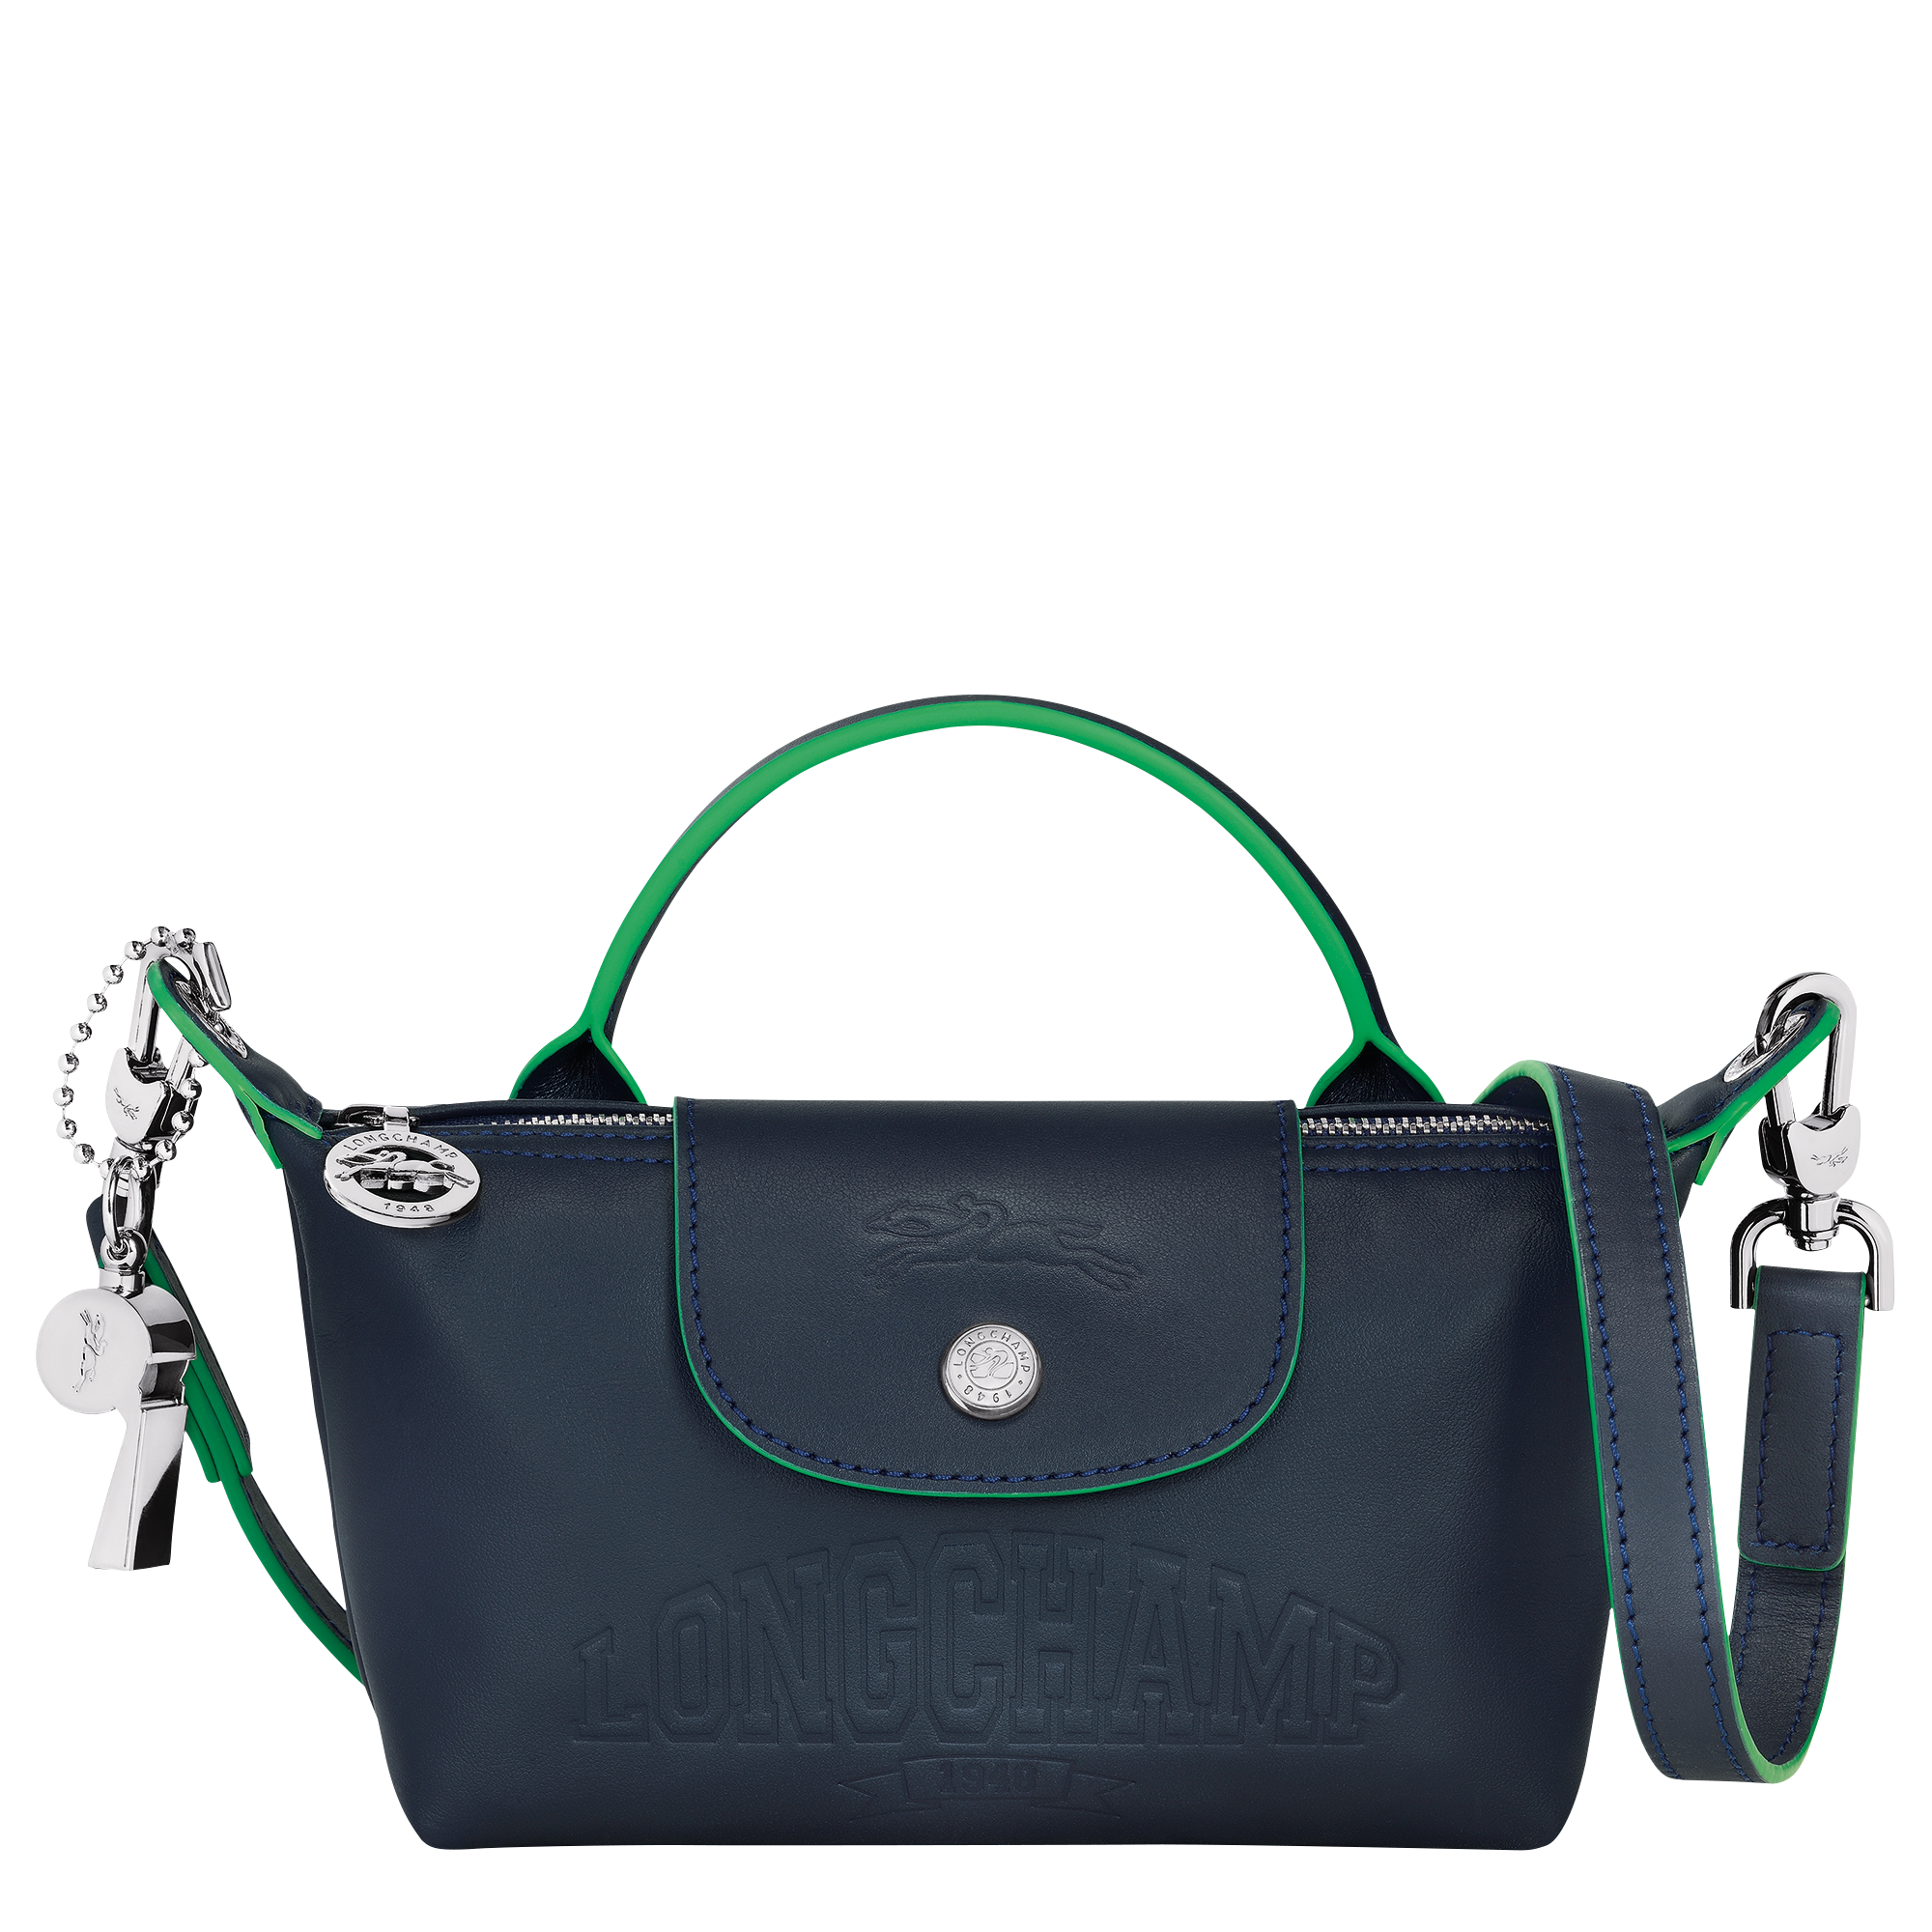 Le Pliage Xtra Pouch XS, Navy